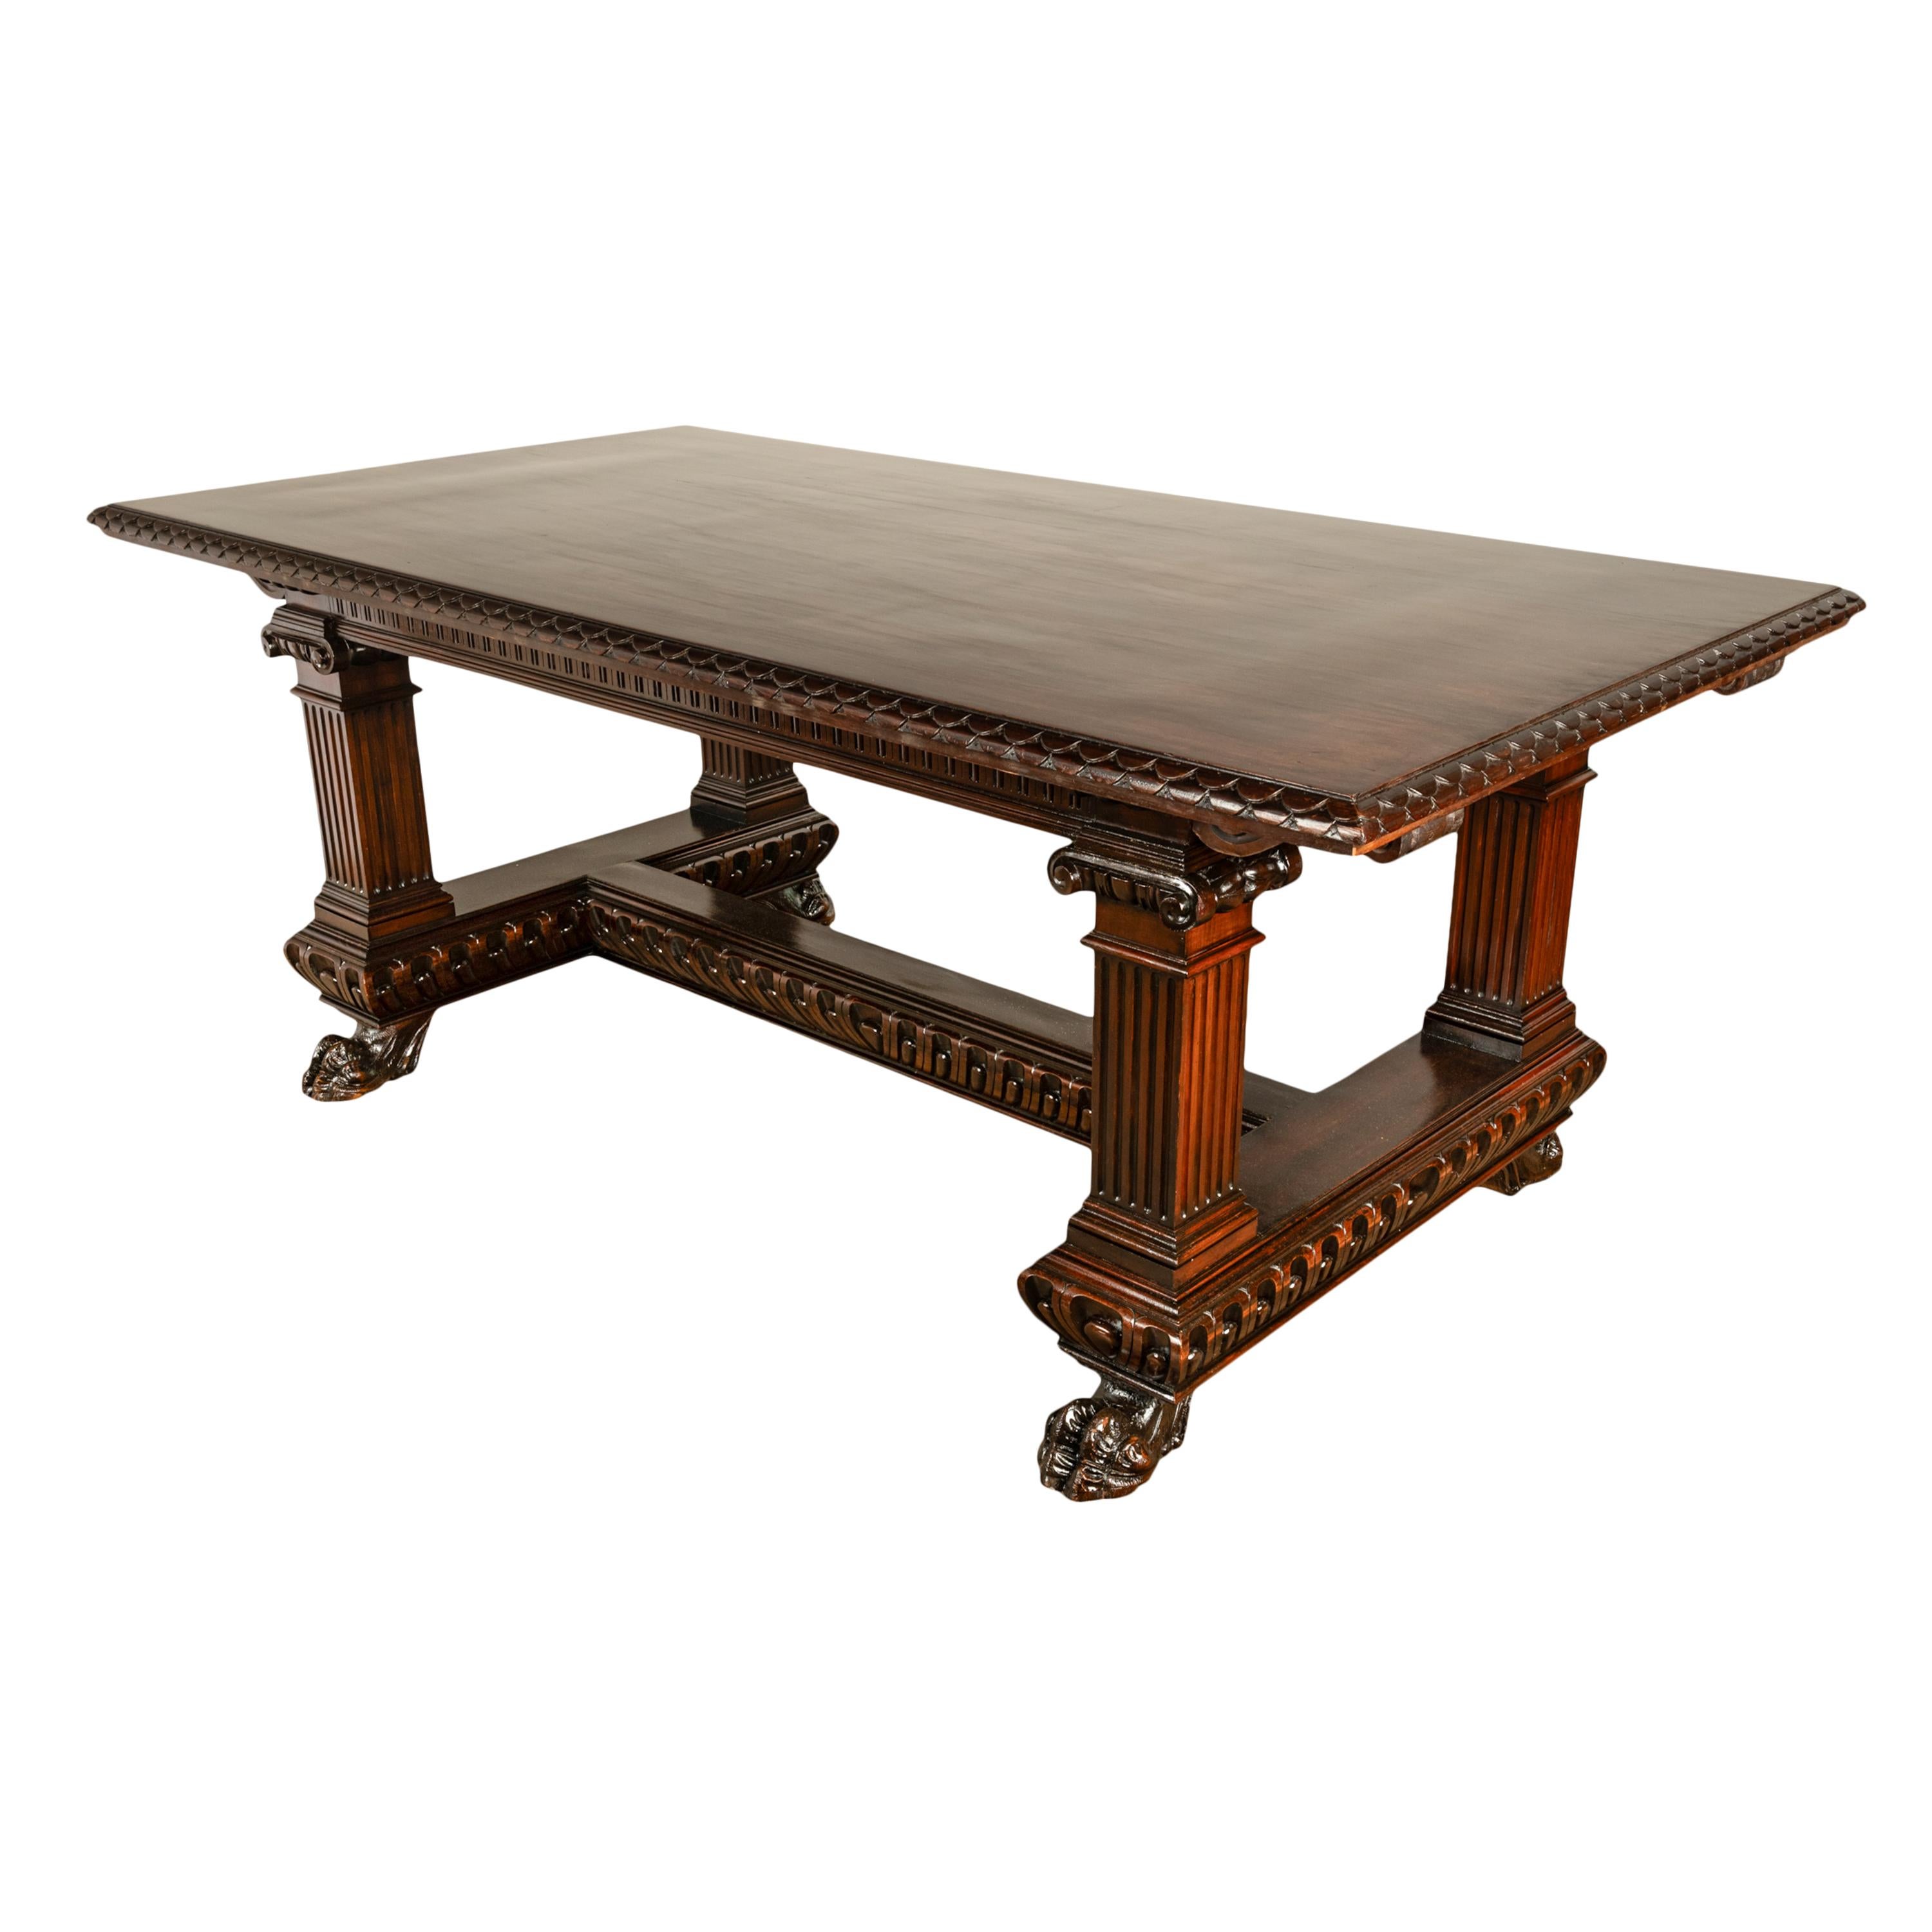 Antique Italian Carved Renaissance Revival Walnut Library Dining Table 1880 For Sale 9